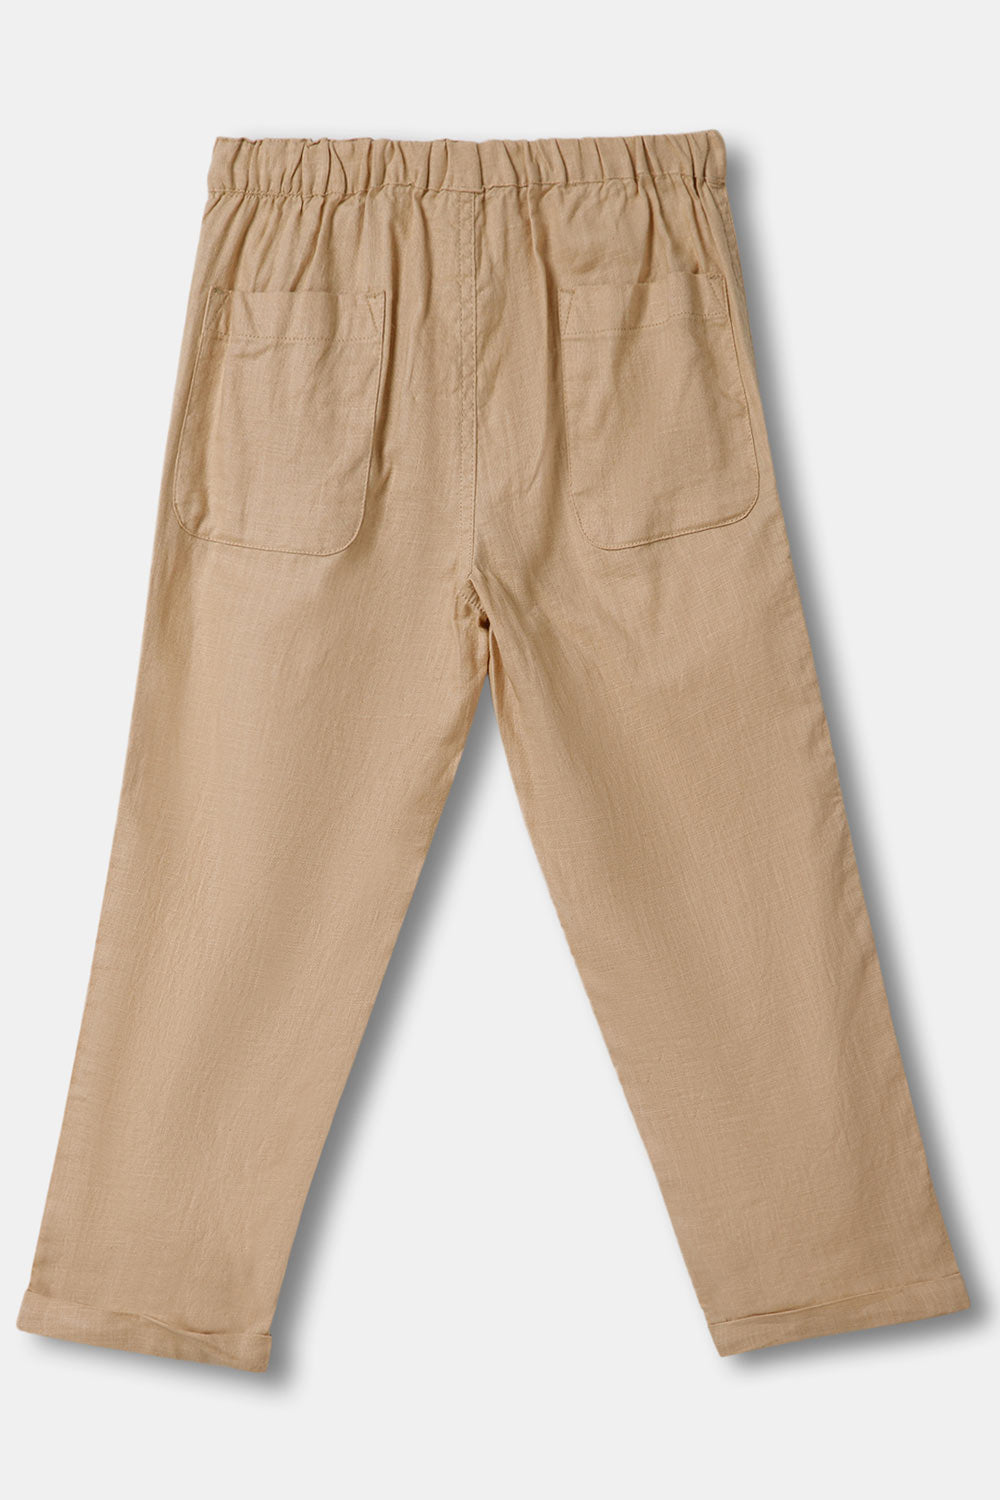 The Young Future  Pants for Boys  - Beige  - BT03